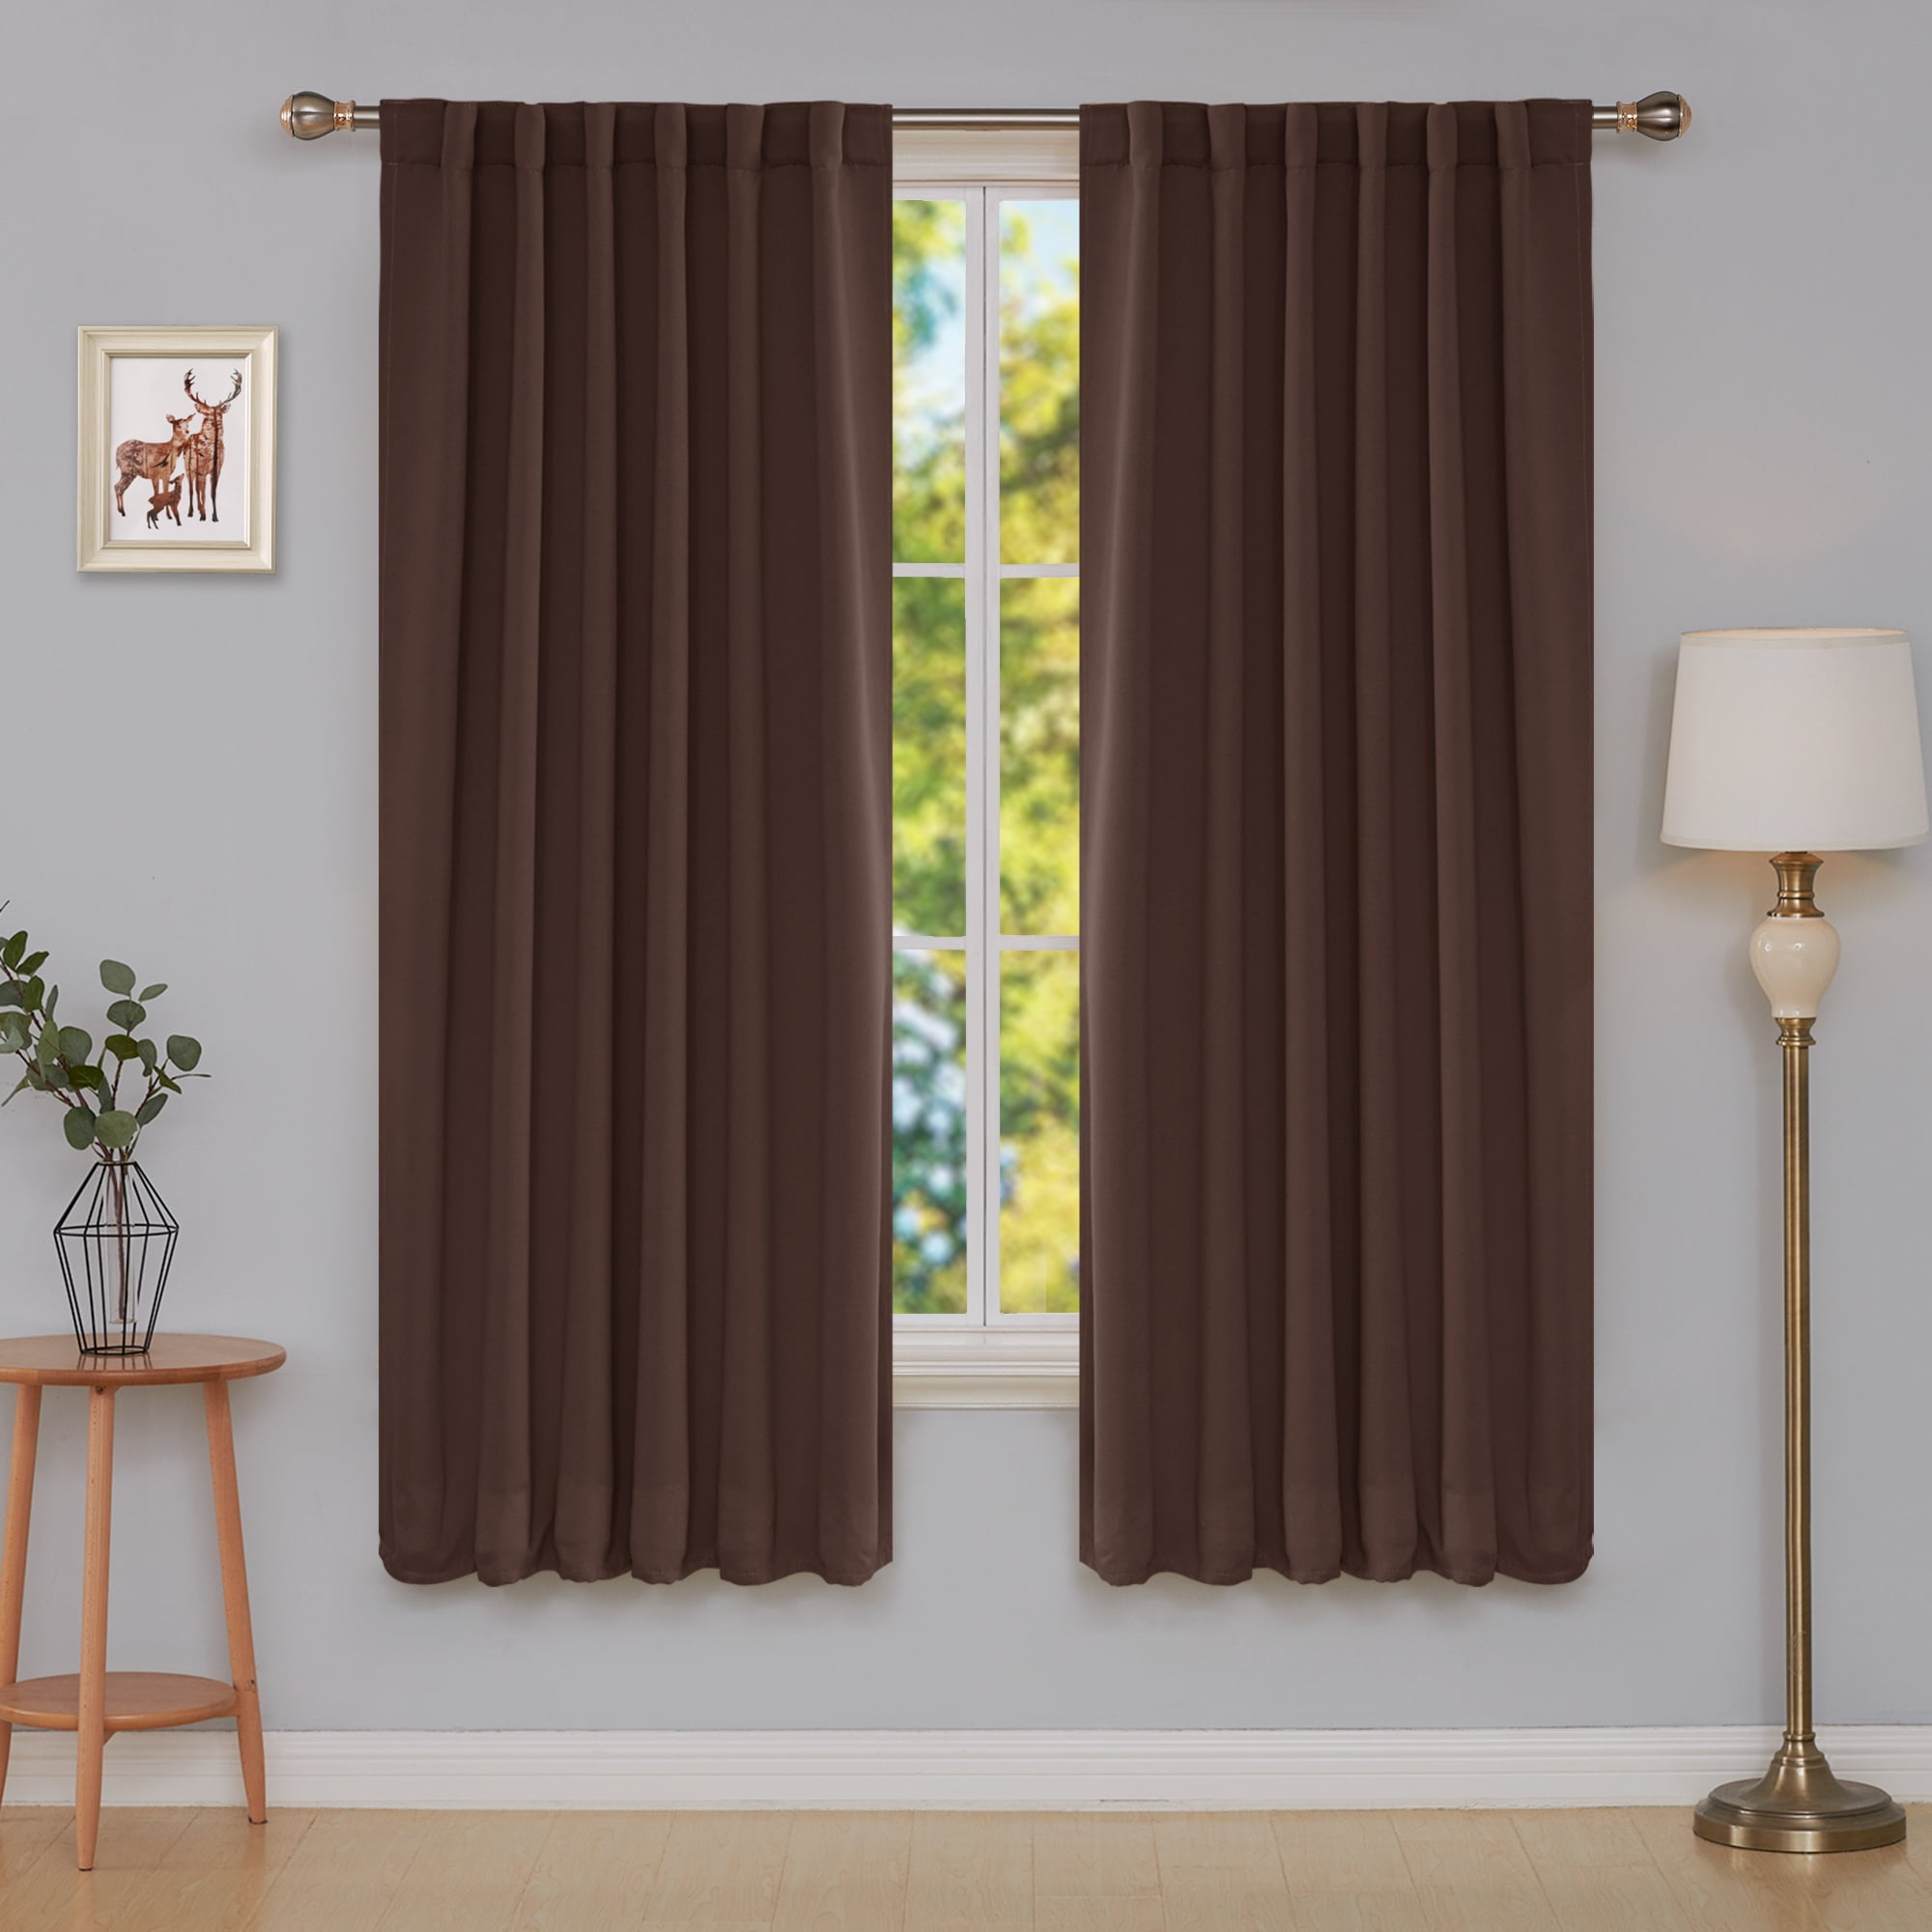 Cream, 46x72 Thermal Blackout Curtain Pair Heavy Insulated Pencil Pleat Tape Top Curtain Pair Room Darkening Curtain Panels